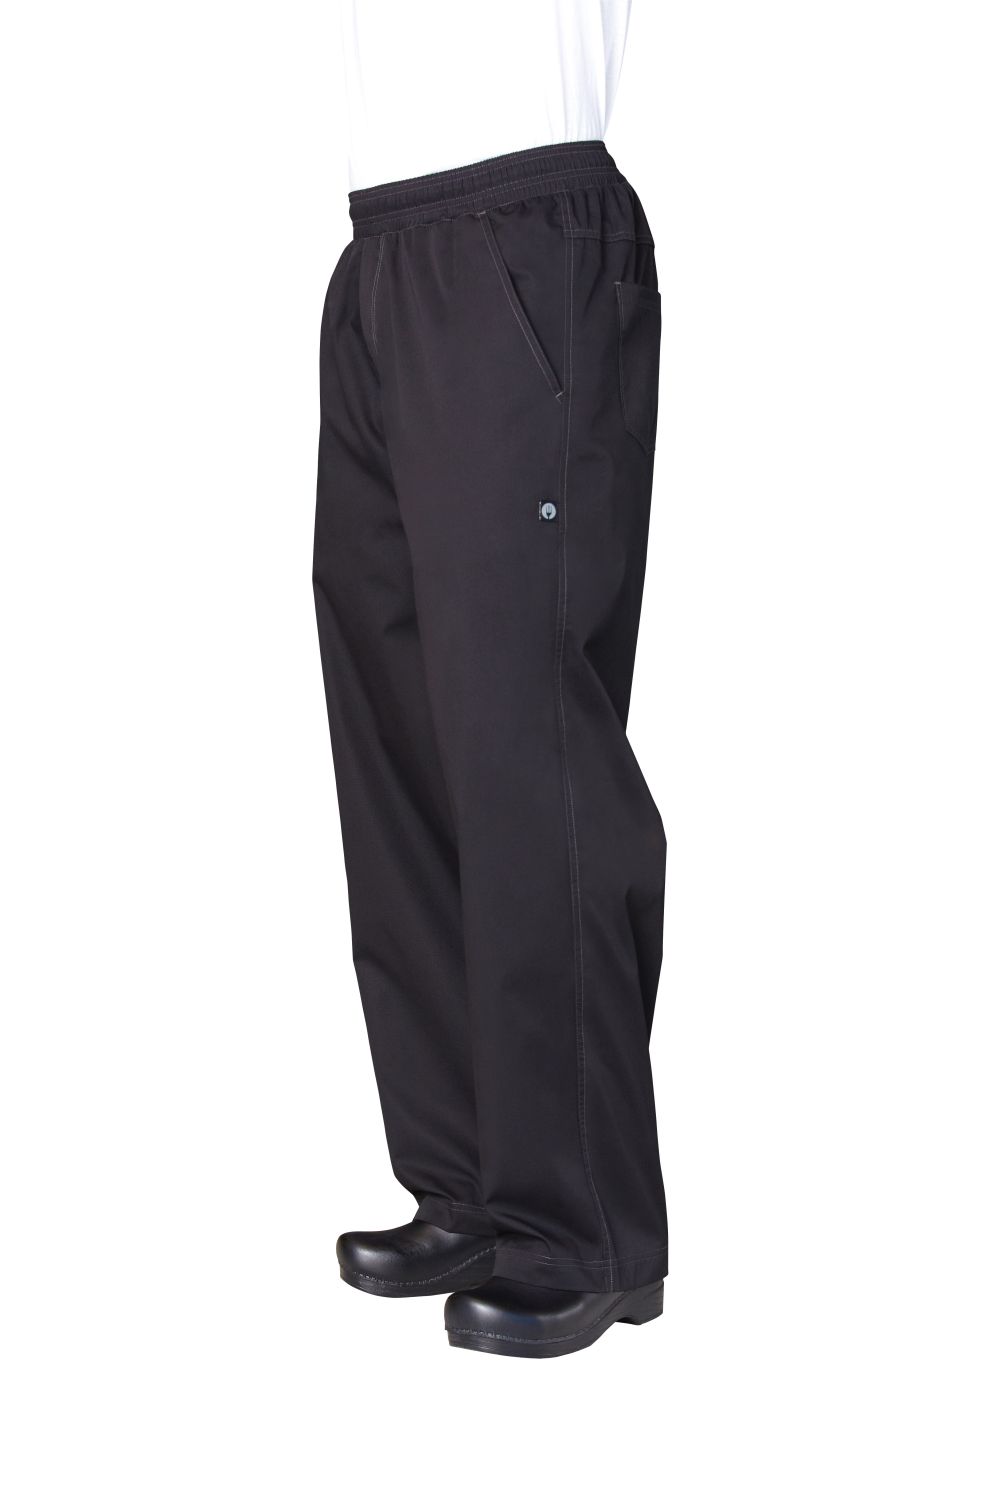 Chef Pants - Checkered, Cargo & Slim Fit Chef Pants | Chef Works